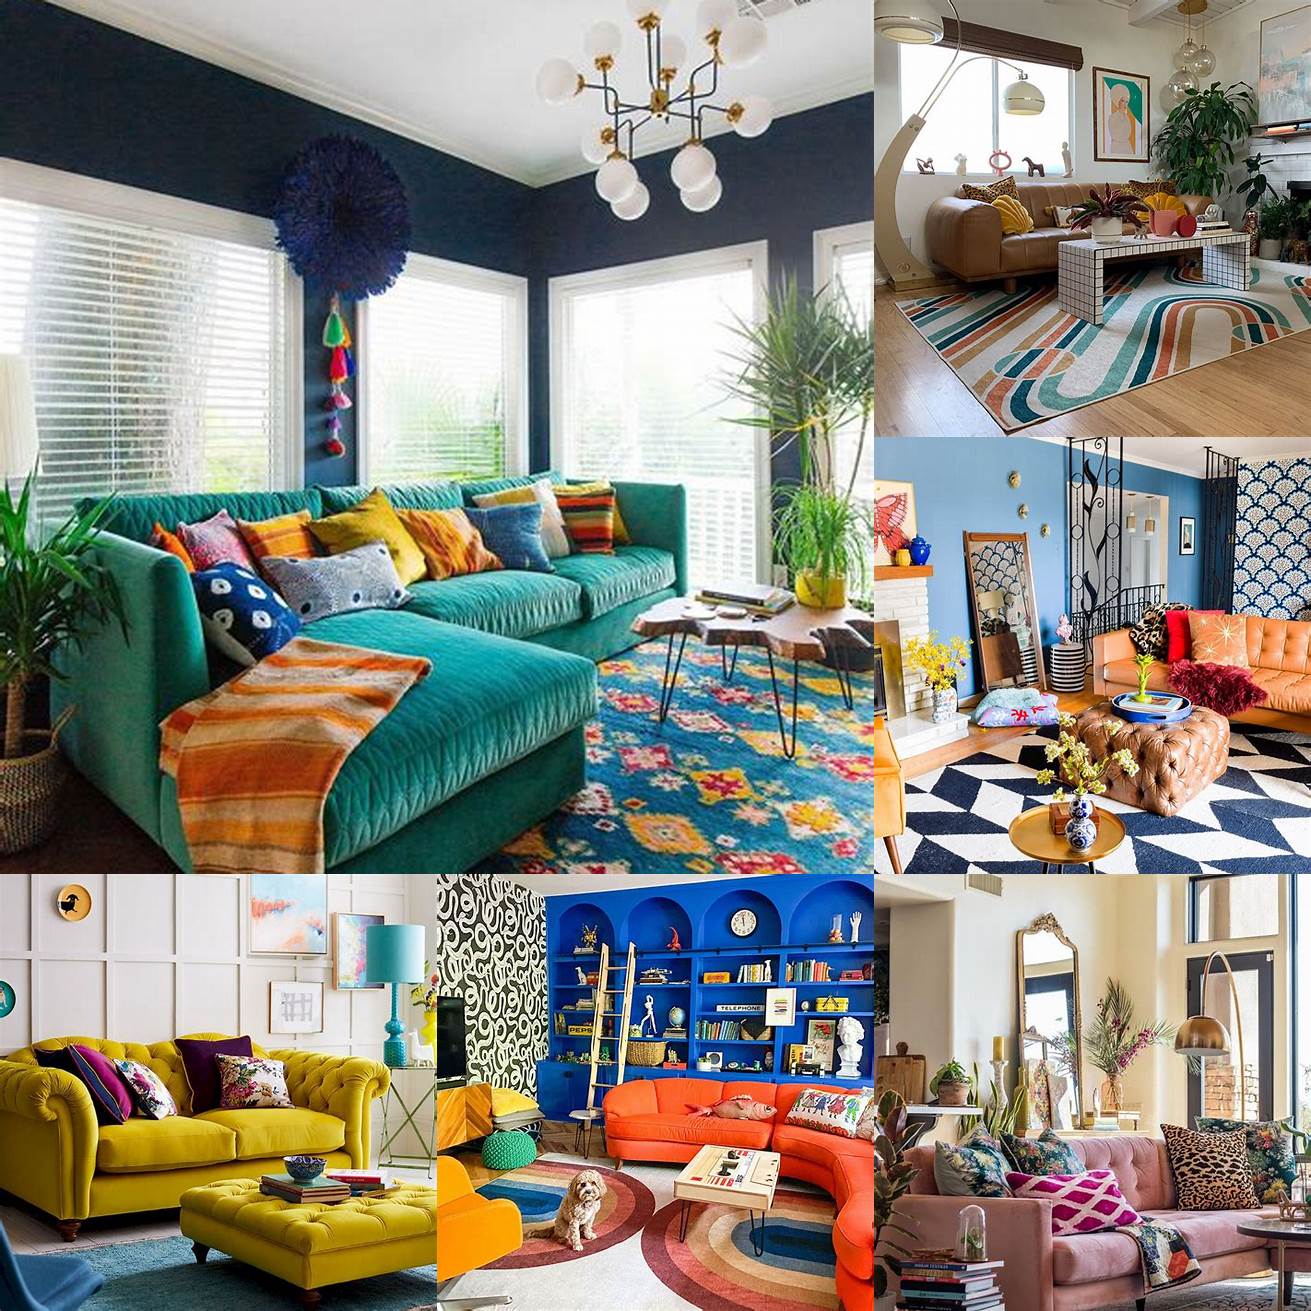 A yellow sofa paired with a colorful patterned rug and eclectic decor